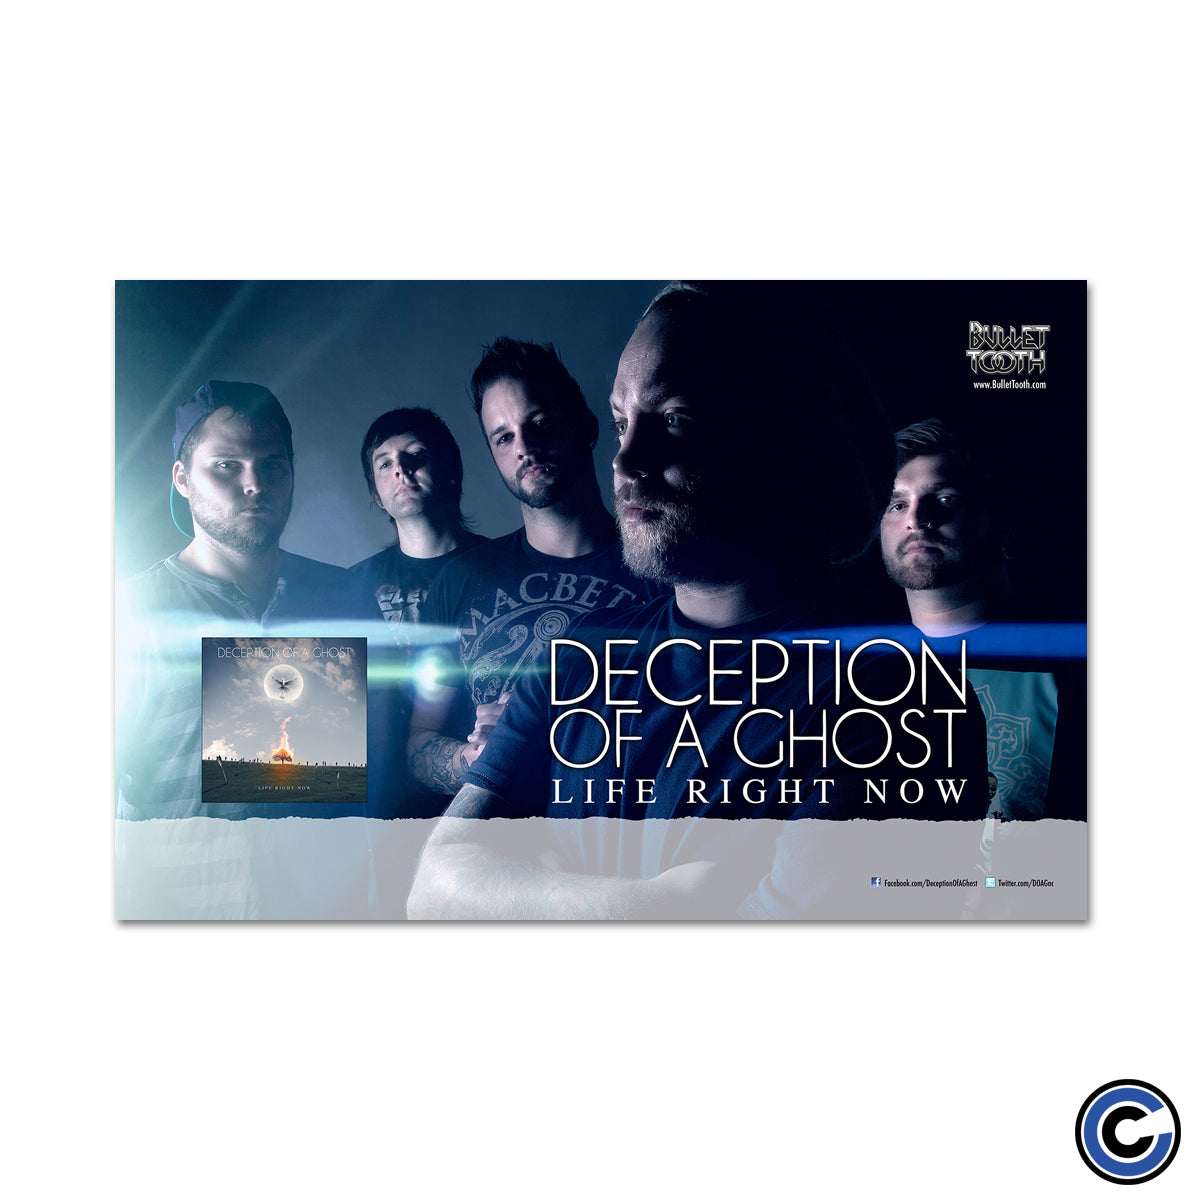 Deception of A Ghost "Life Right Now" Poster